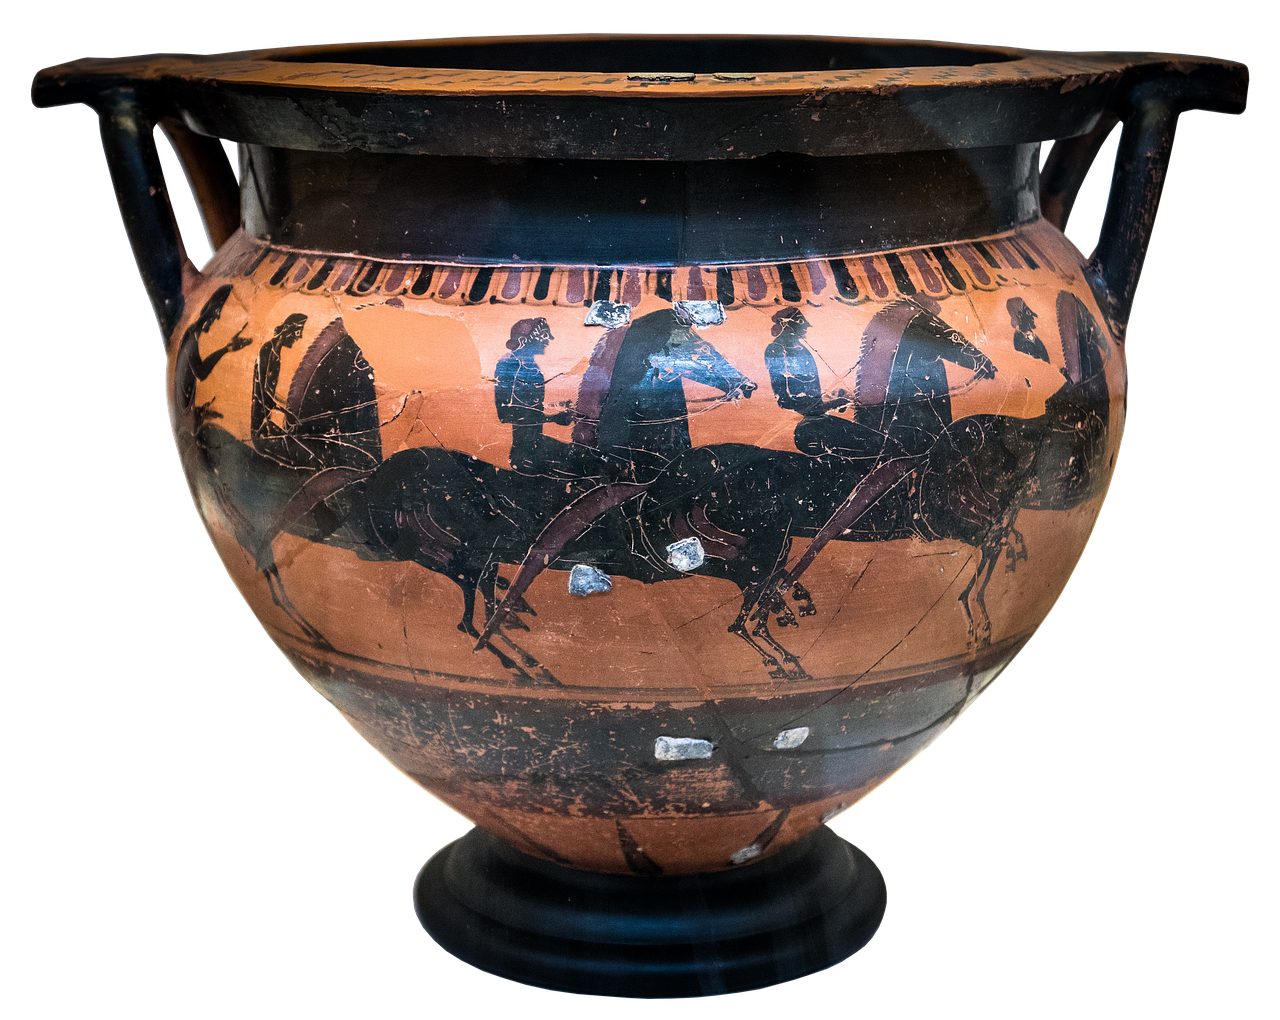 A pot from Ancient Rome